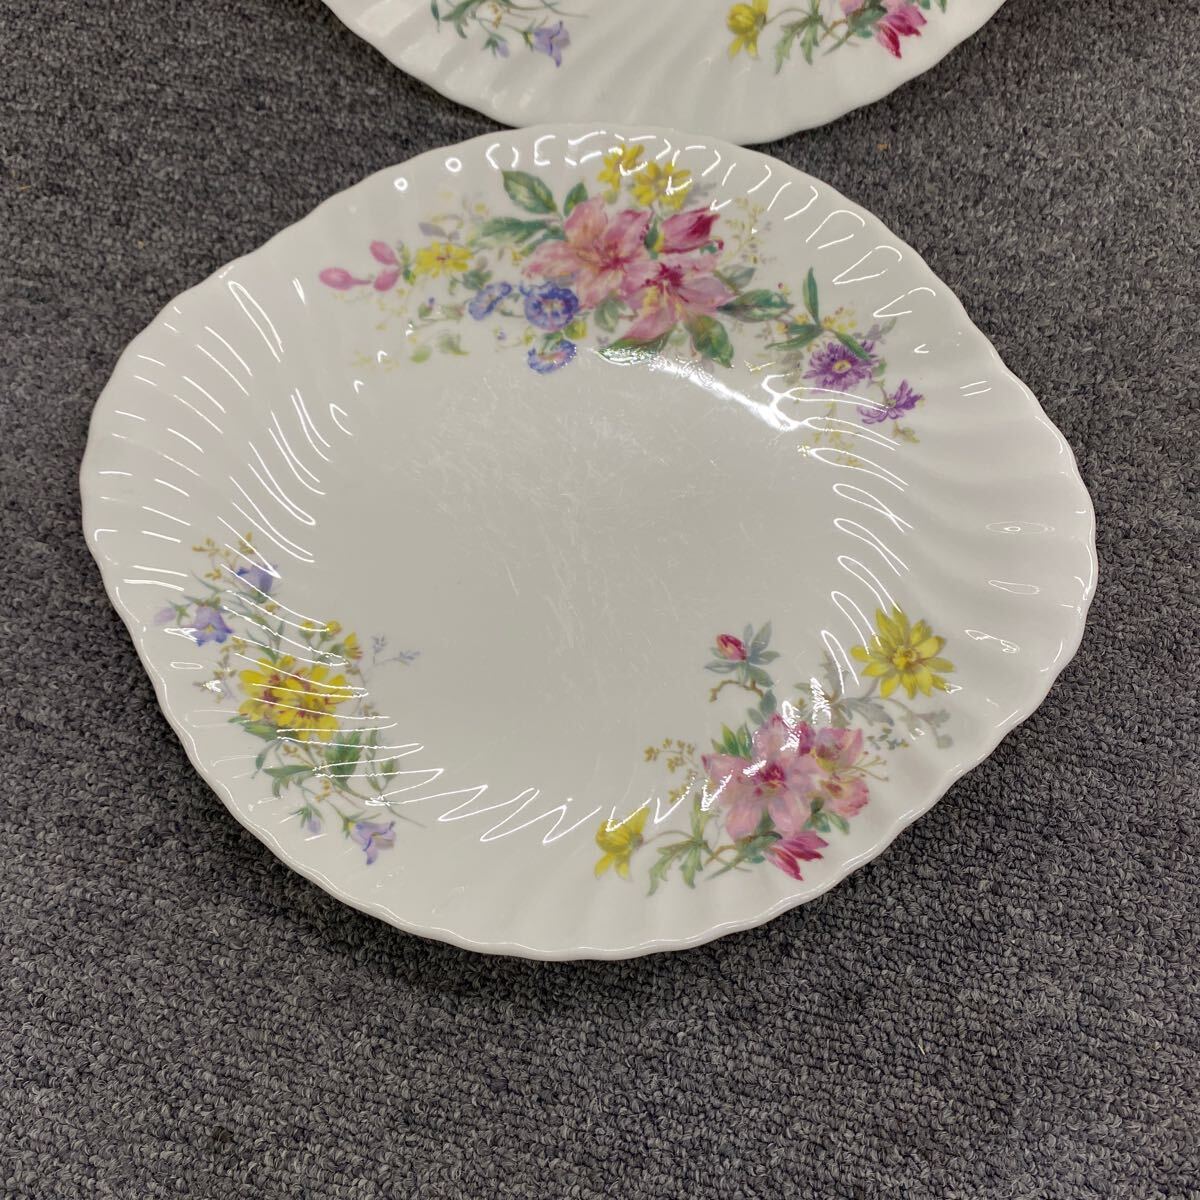 04110 Royal Doulton Royal Doultona LUKA tiaARCADIA ear attaching plate 2 pieces set floral print Western-style tableware 